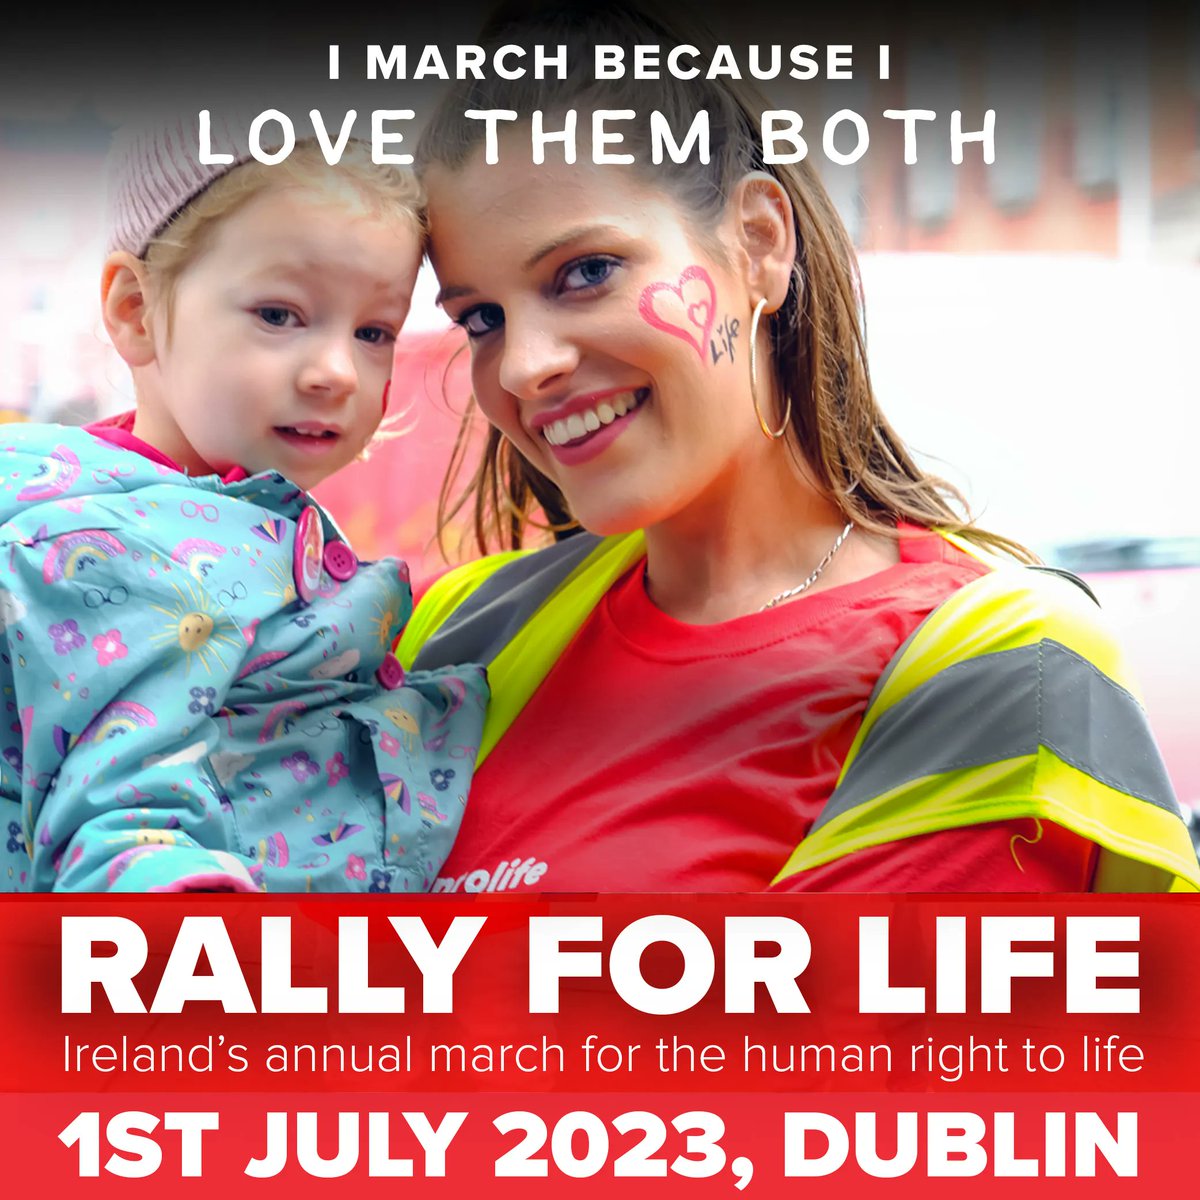 We love BOTH mother and baby!!

JOIN US for the Rally for Life taking place in just a few weeks on Saturday 1st July at 1pm, and march to with us to show that we love them both!

buff.ly/3kxksfa 

#StopAbortingOurFuture #RallyforLife #WhyWeMarch